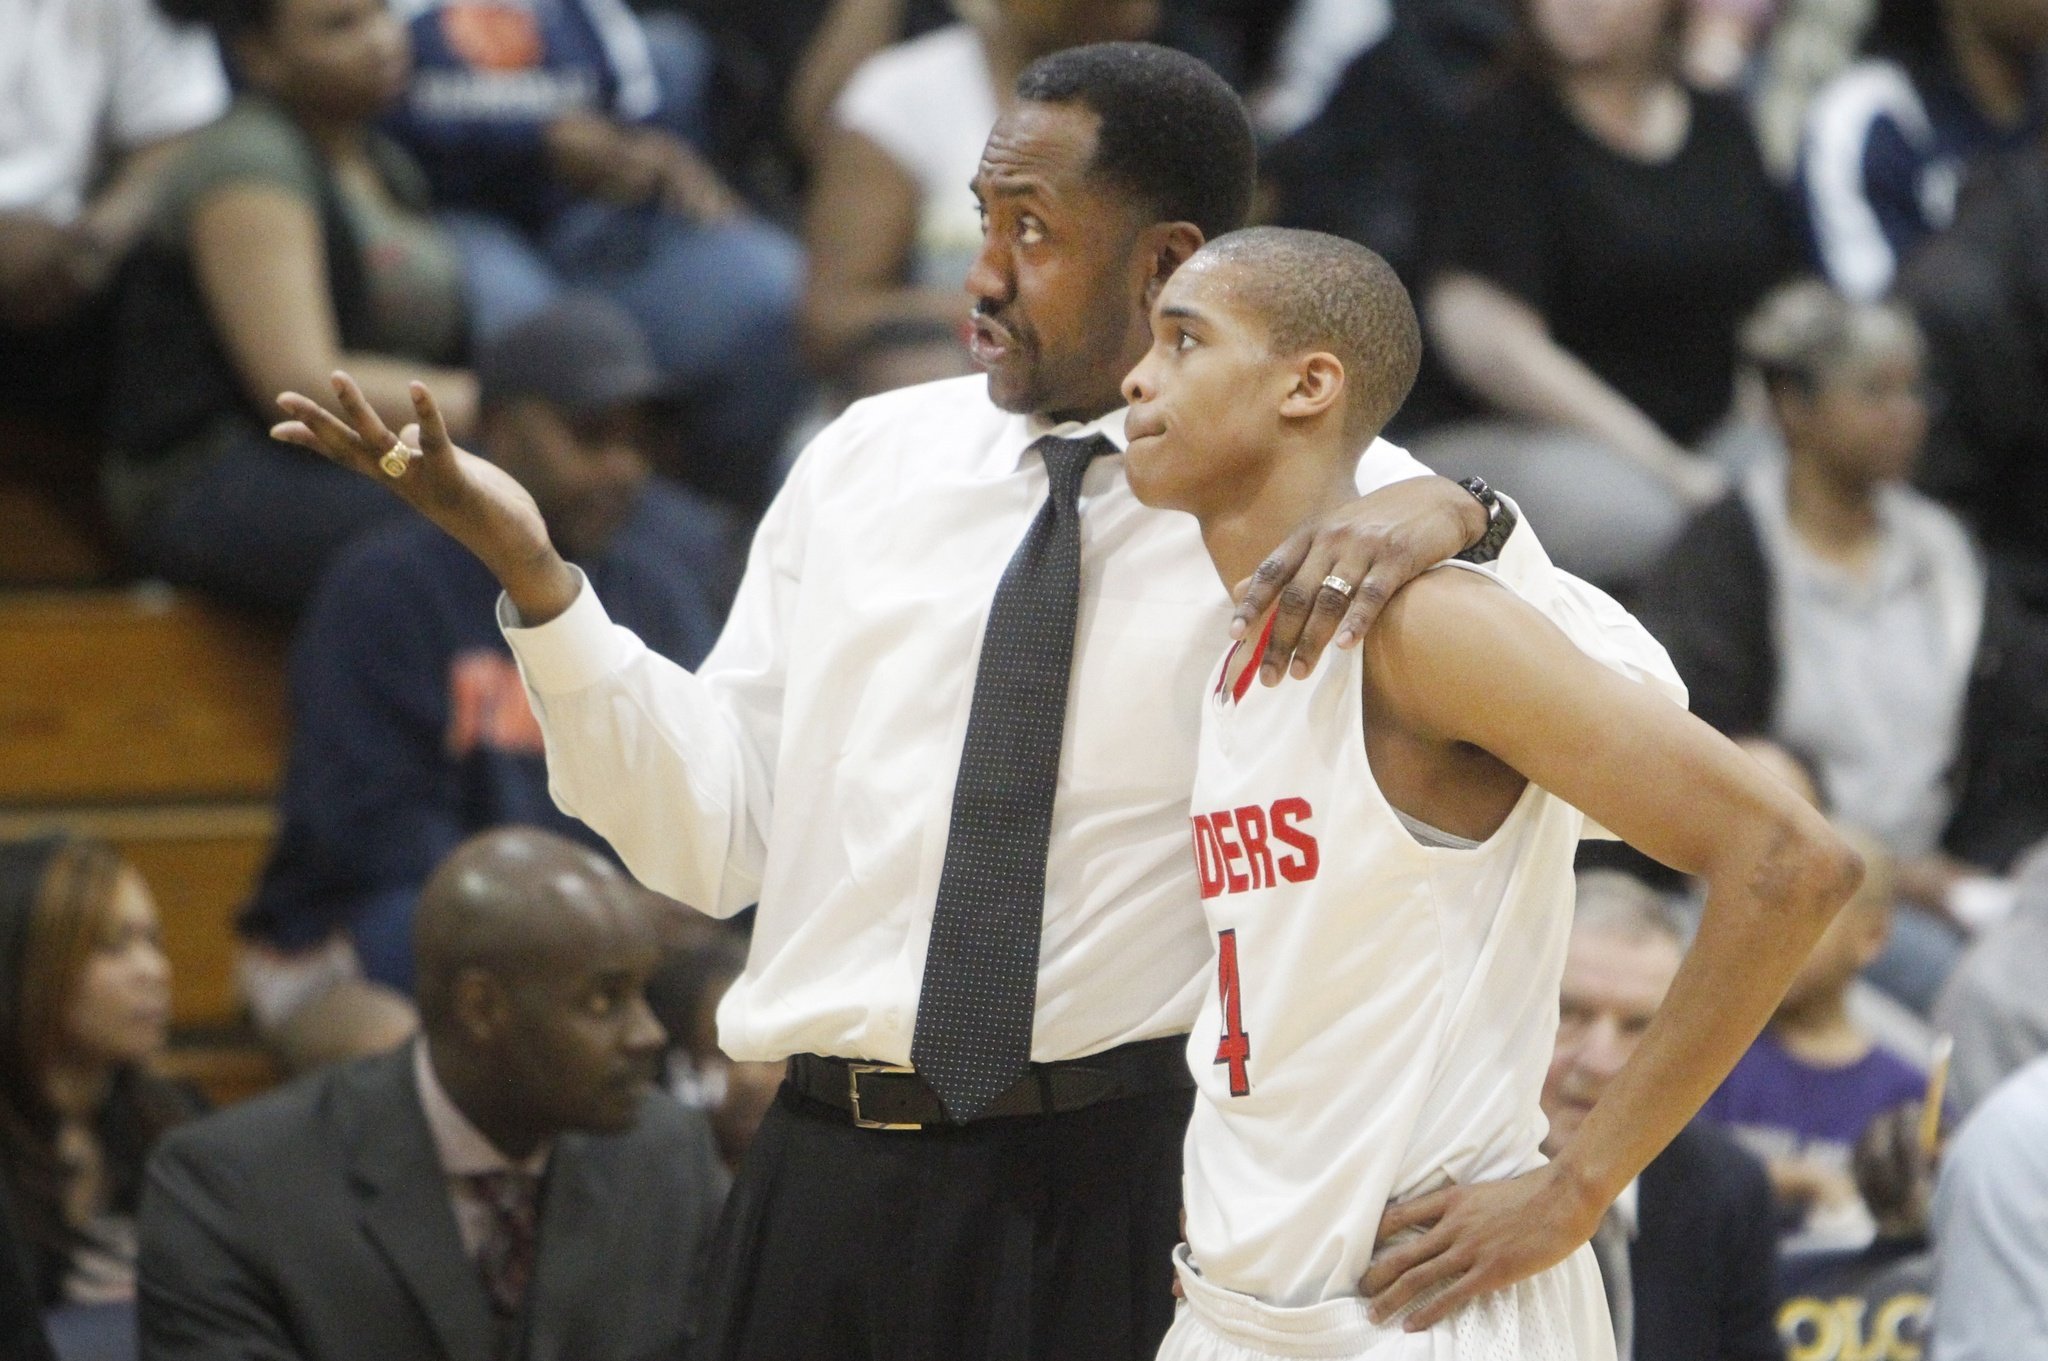 Basketball Coaching: 3 Ways to Build Confidence in Your Players